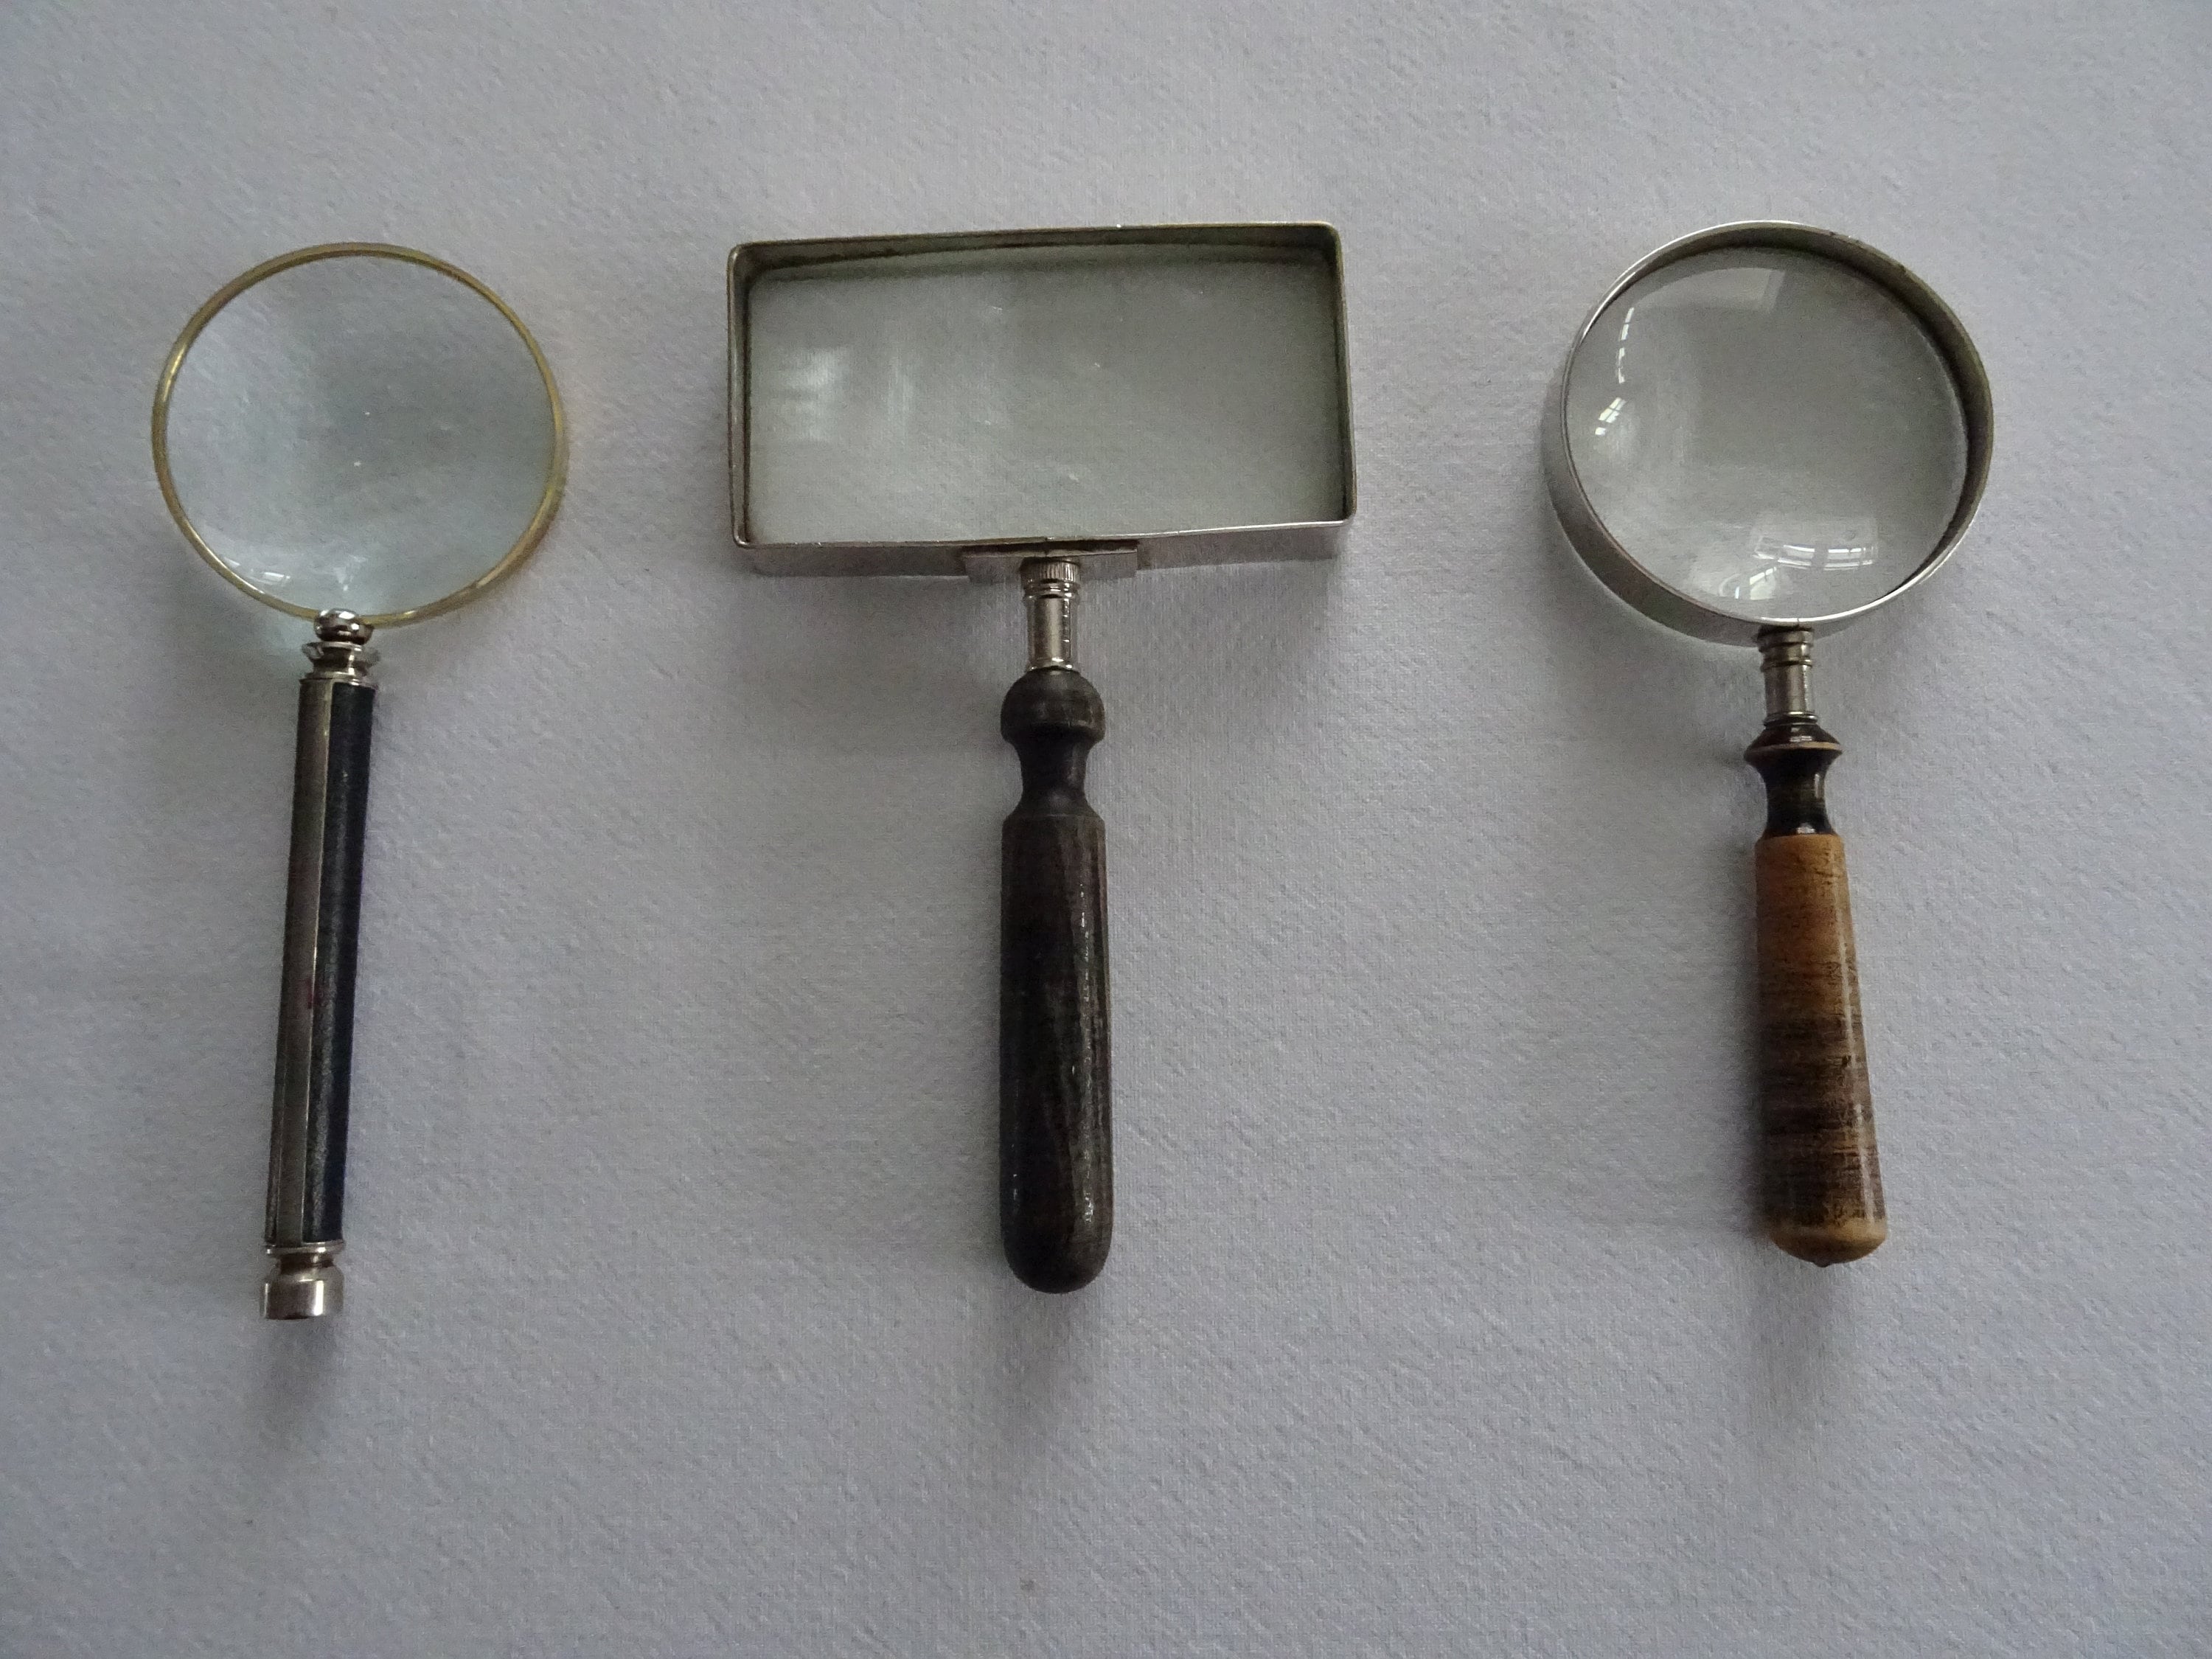 8 Brass Magnifier With White Bone Handle Antique Vintage Style 